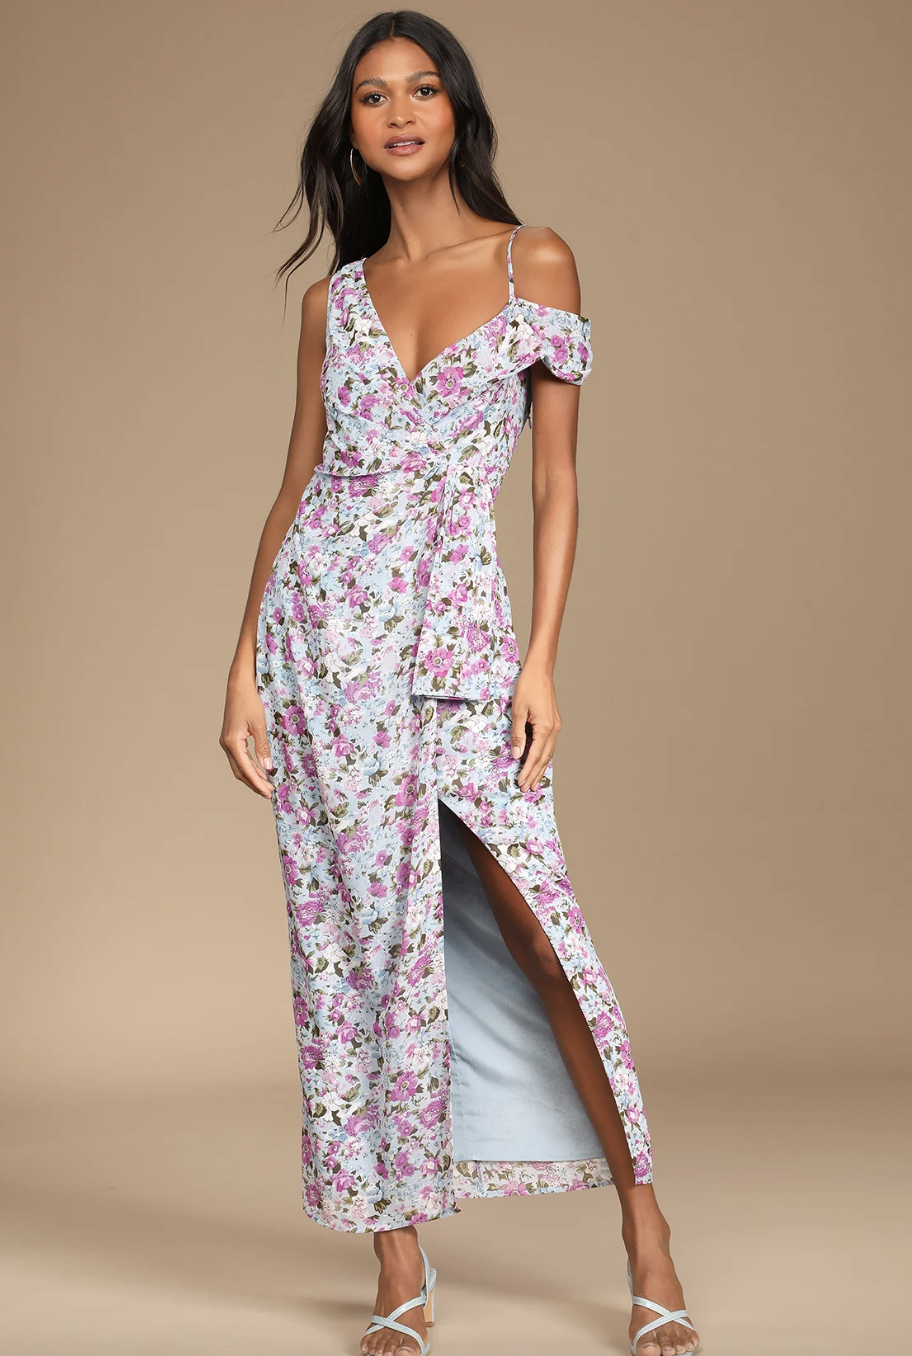 model in pink and blue floral dress, With a Flourish Blue Floral Print Off-the-Shoulder Maxi Dress (Photo via Lulus)